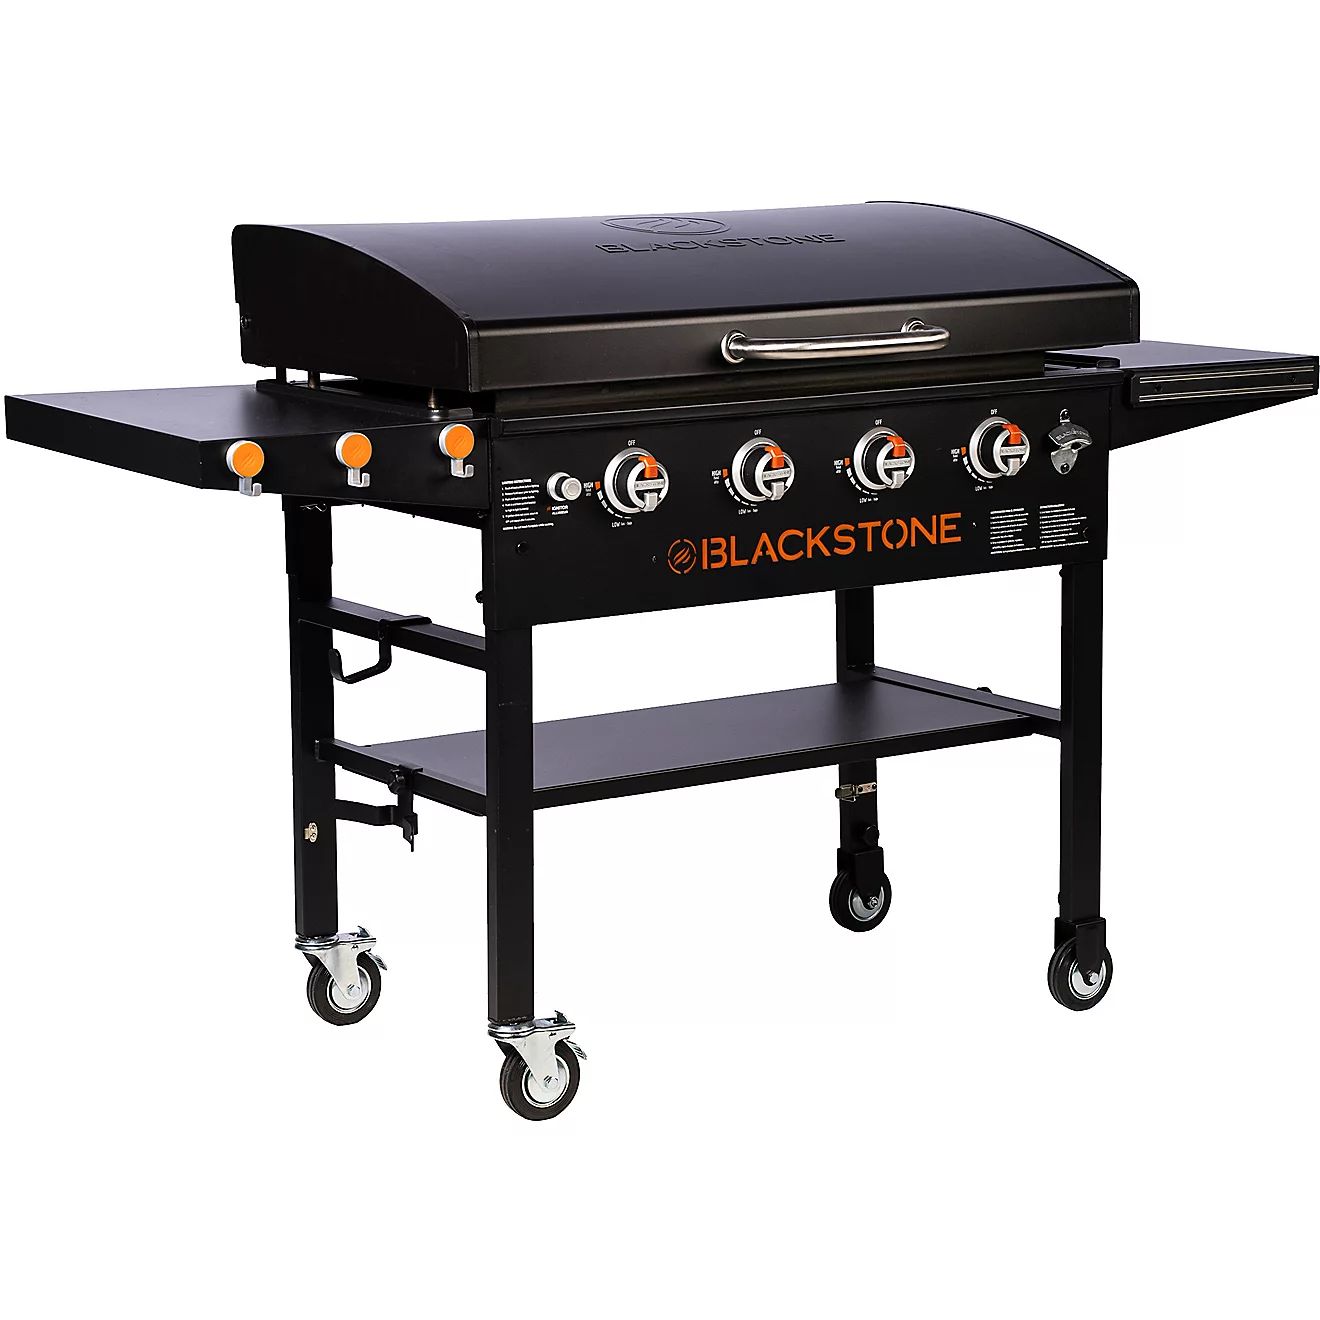 Blackstone 36 in 4-Burner Griddle Station with Hood | Academy | Academy Sports + Outdoors